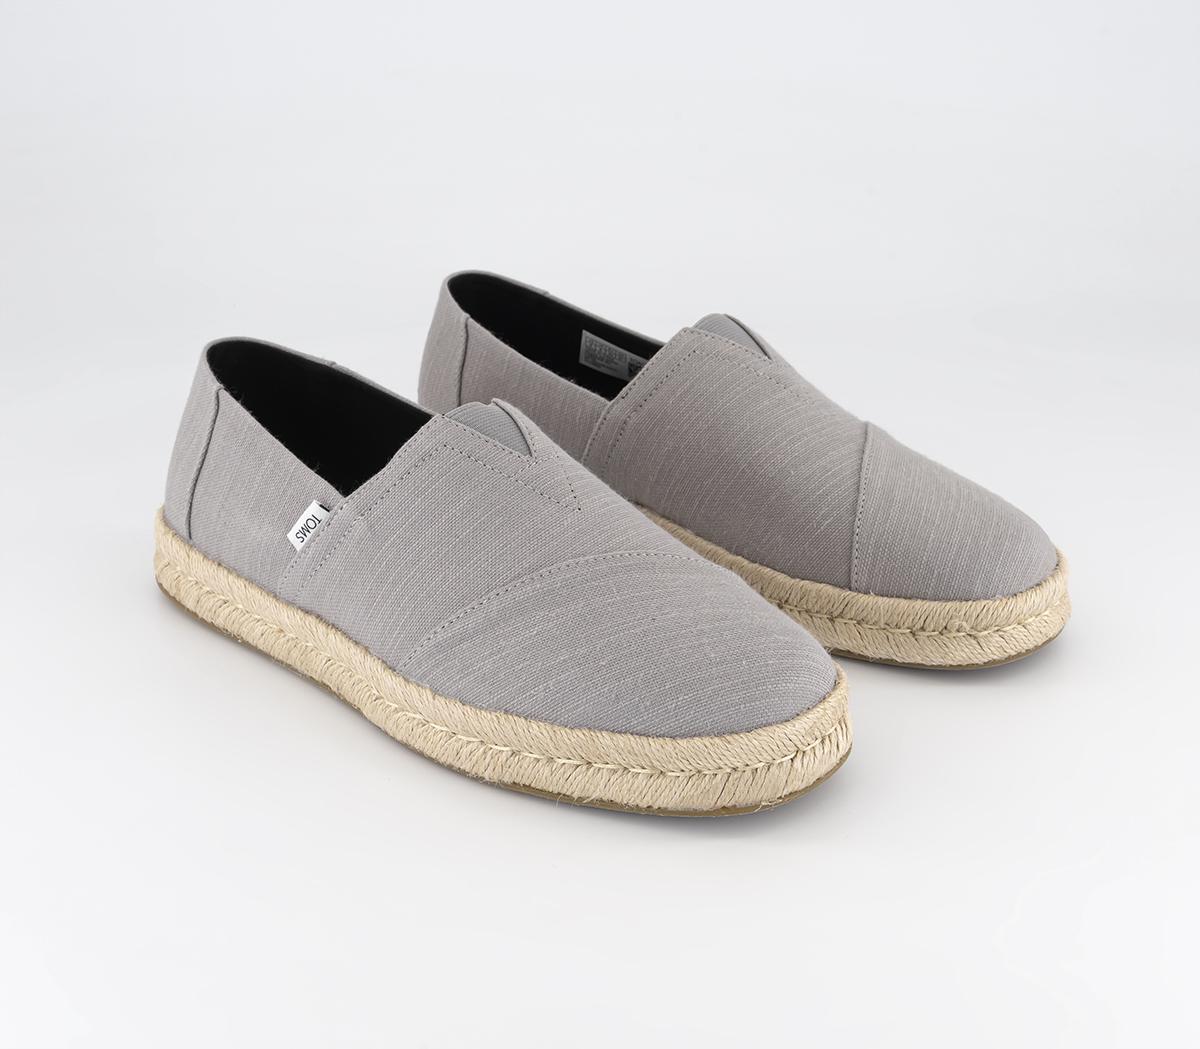 TOMS Mens Alpargata Rope 2.0 Slip Ons Drizzle Grey Recycled Cotton Slubby Woven, 6